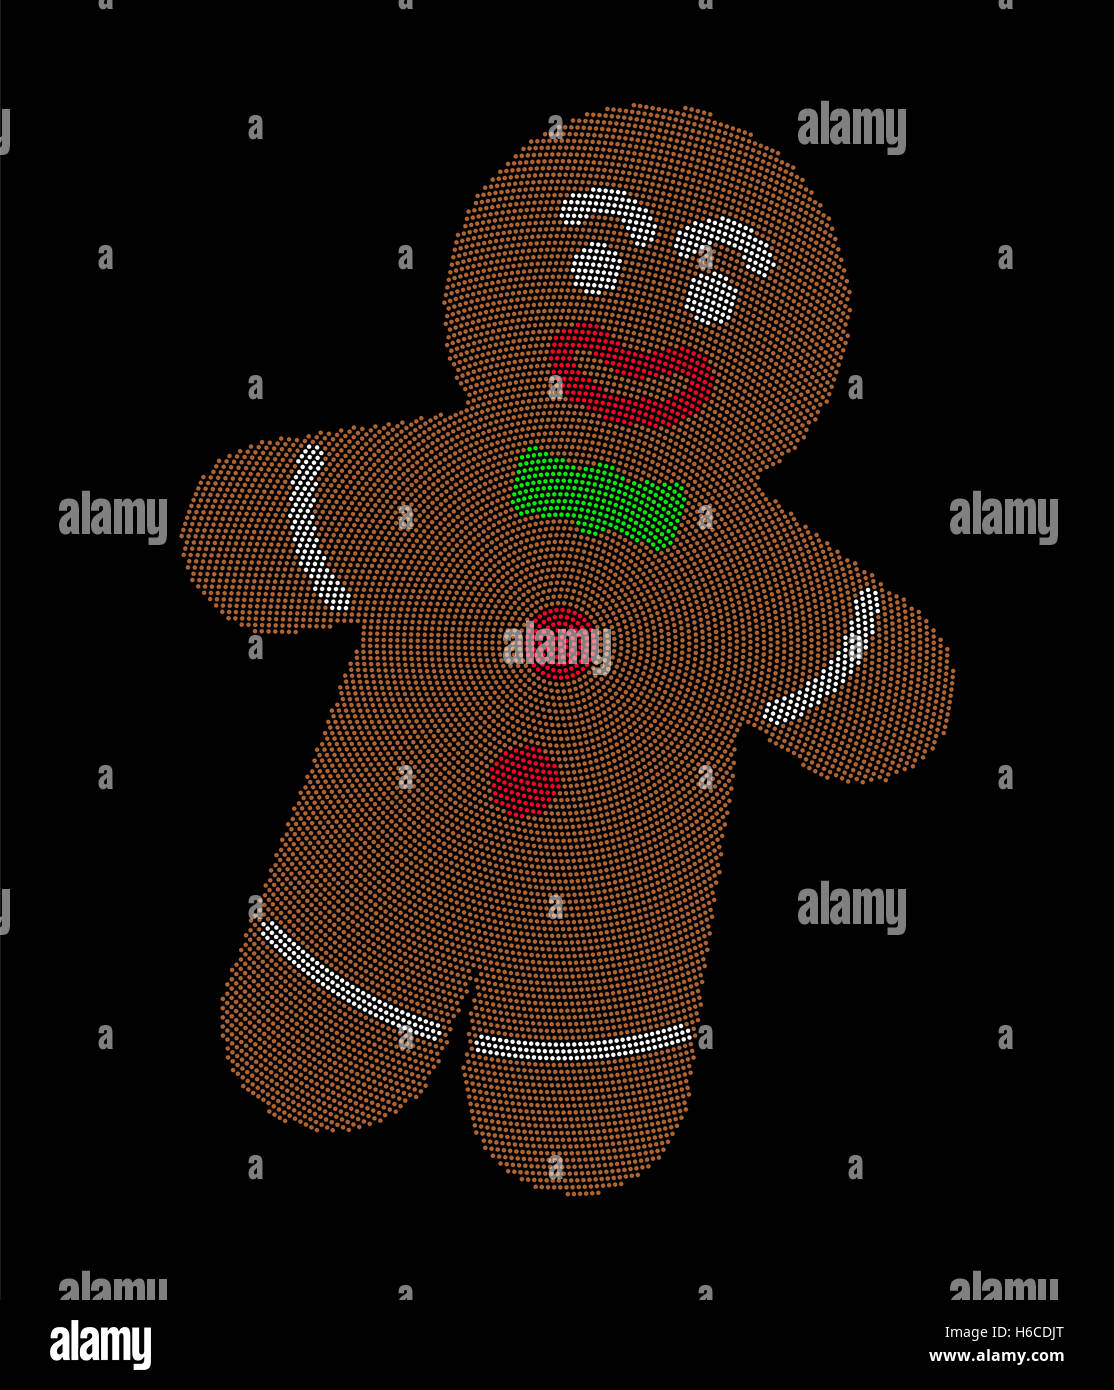 Gingerbread man radial dot pattern on black background in the shape of a stylized human. Characteristic Christmas symbol. Stock Photo